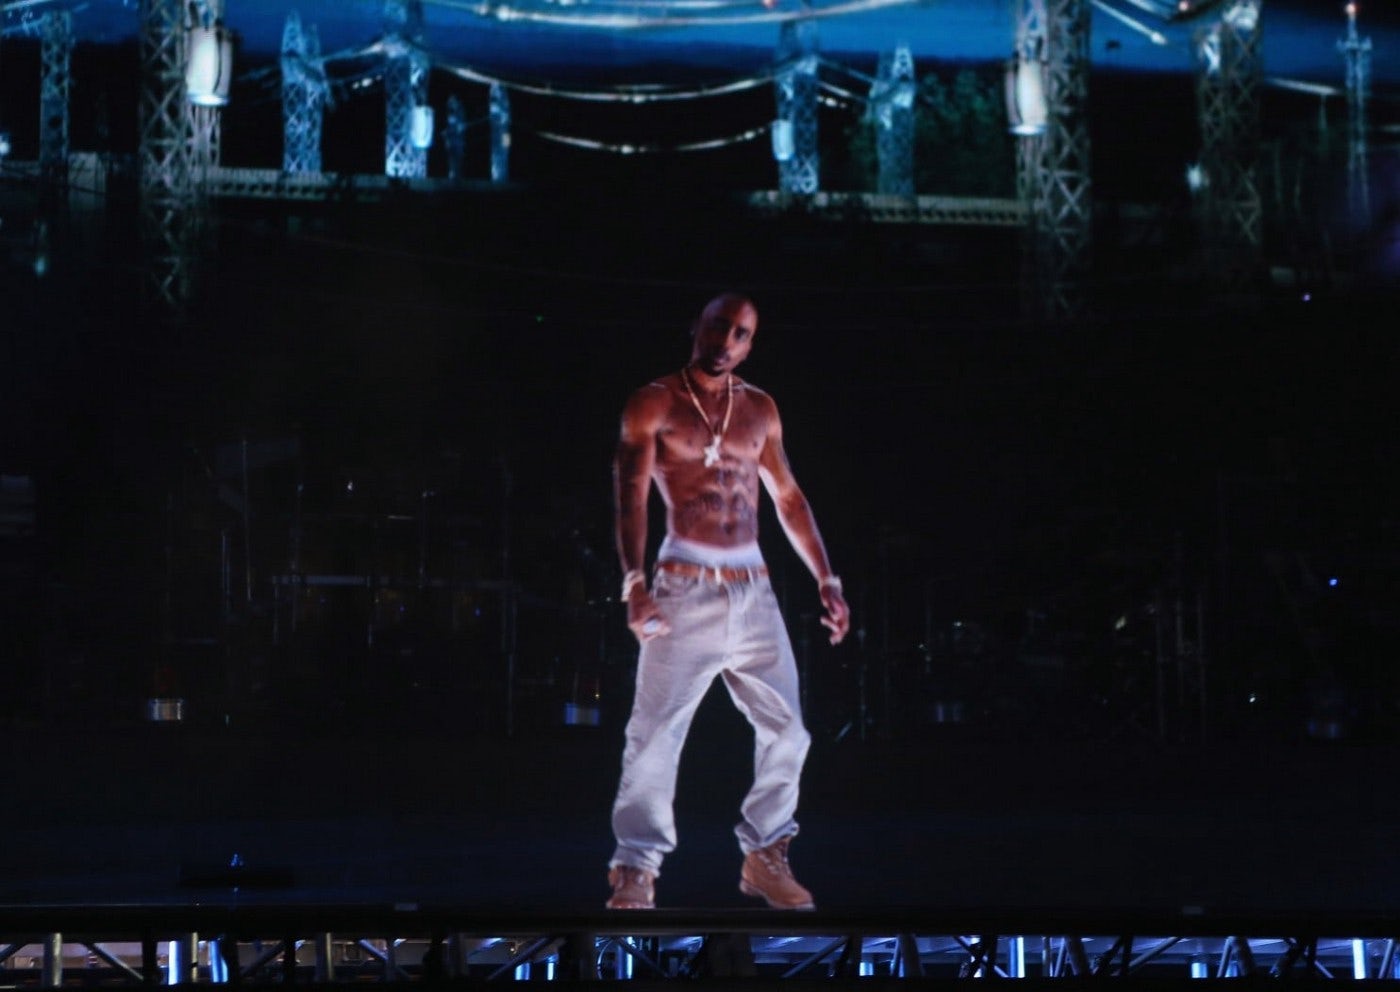 Tupac Shakur performs on stage as hologram, April 15, 2012 in Indio, California.